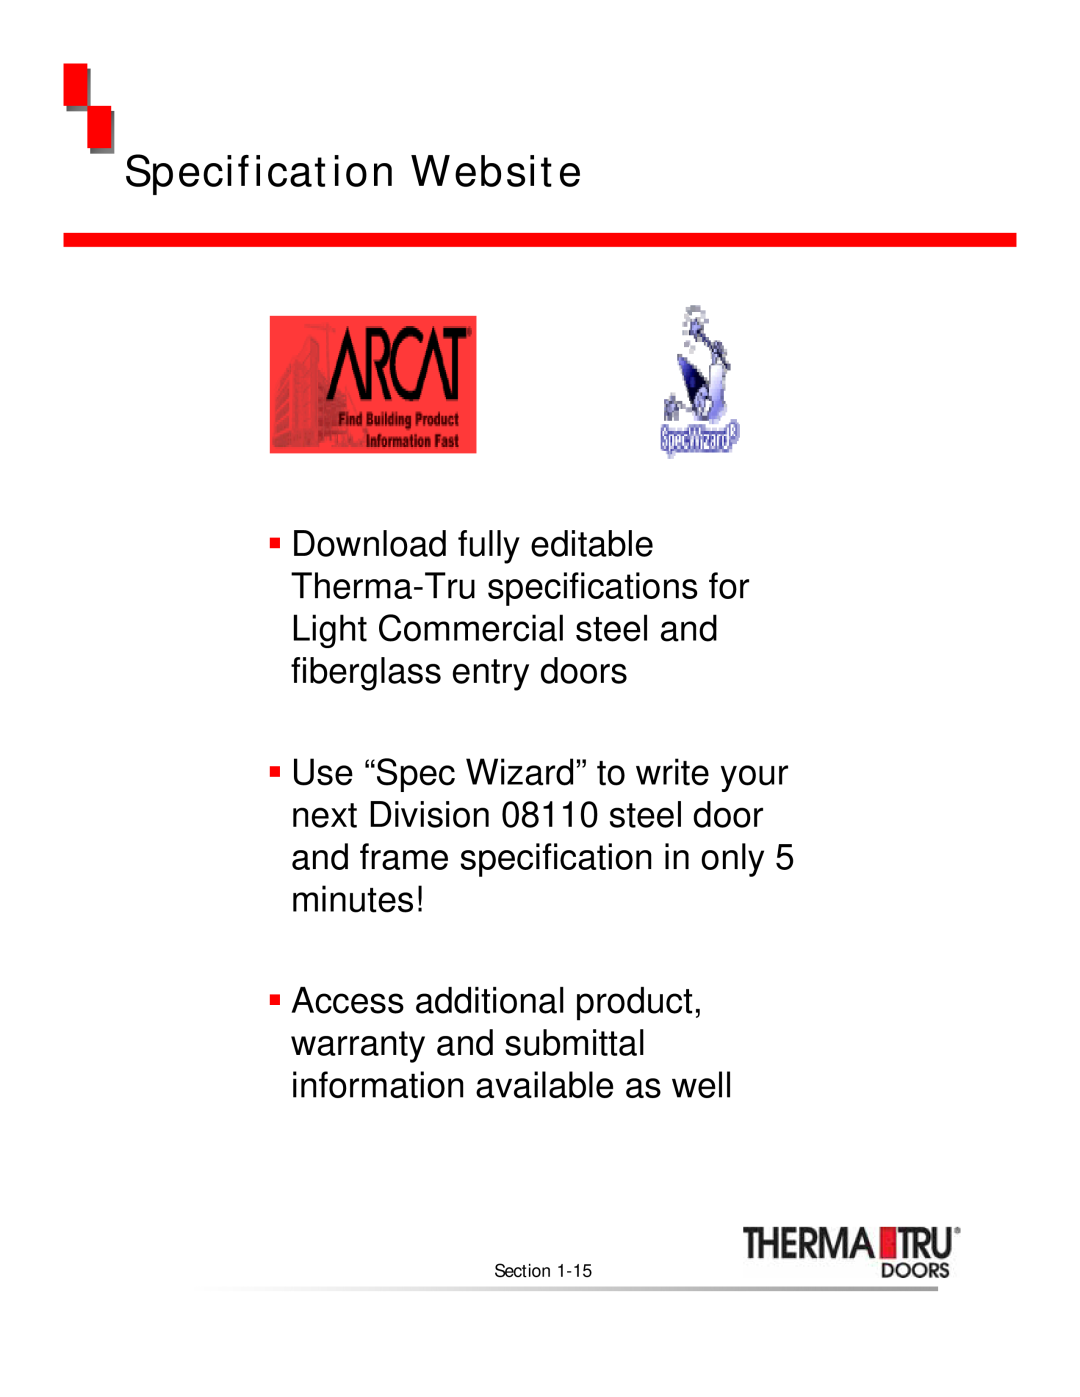 Therma-Tru none manual Specification Website 